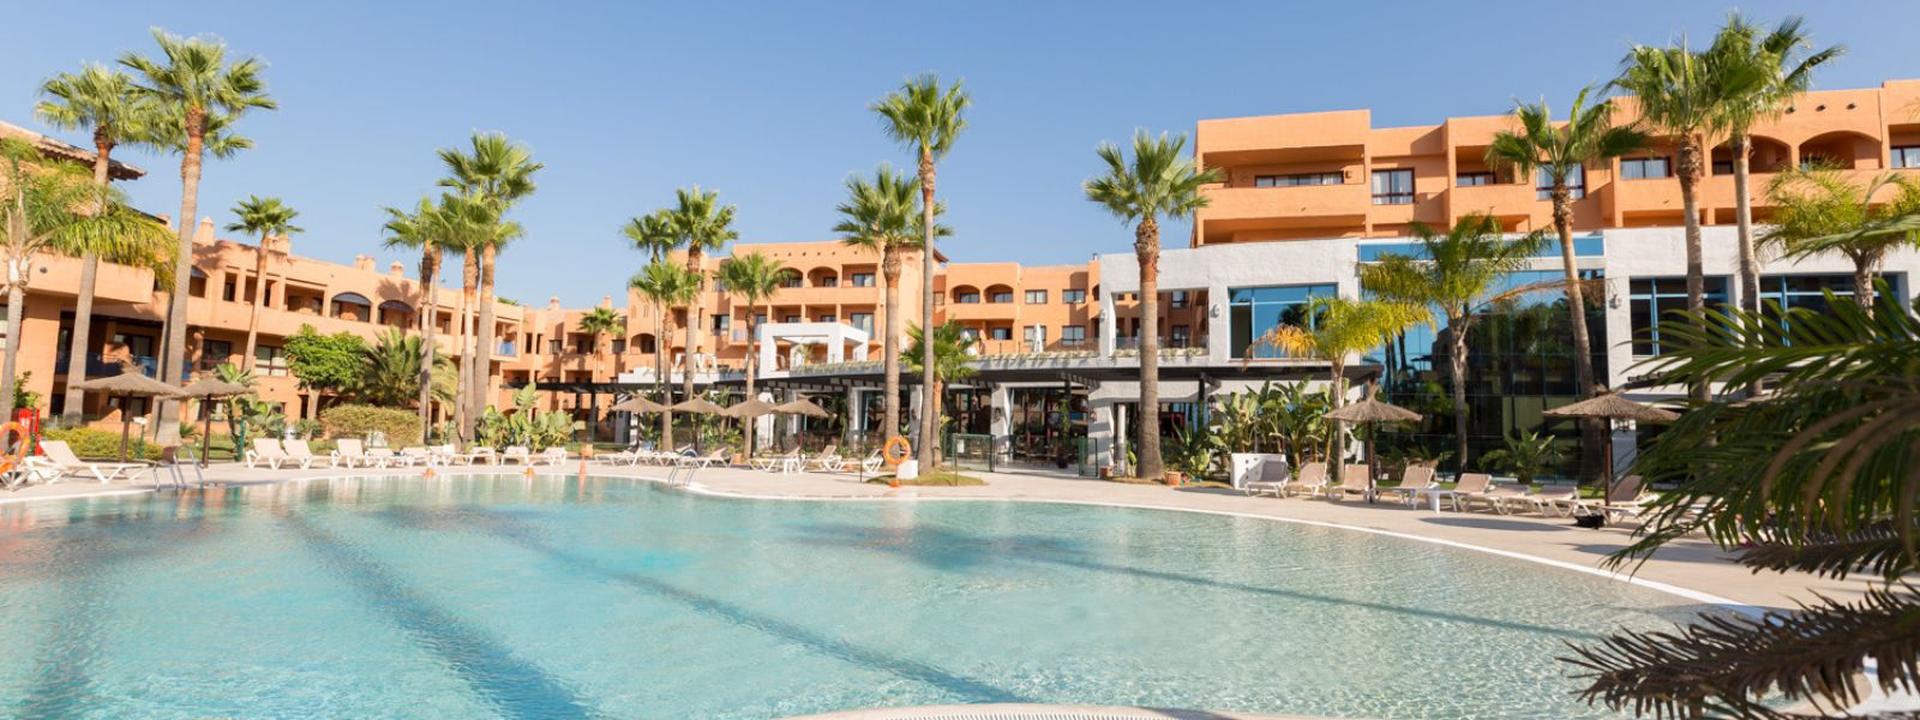 Live unforgettable moments in Estepona! GHL Hotels